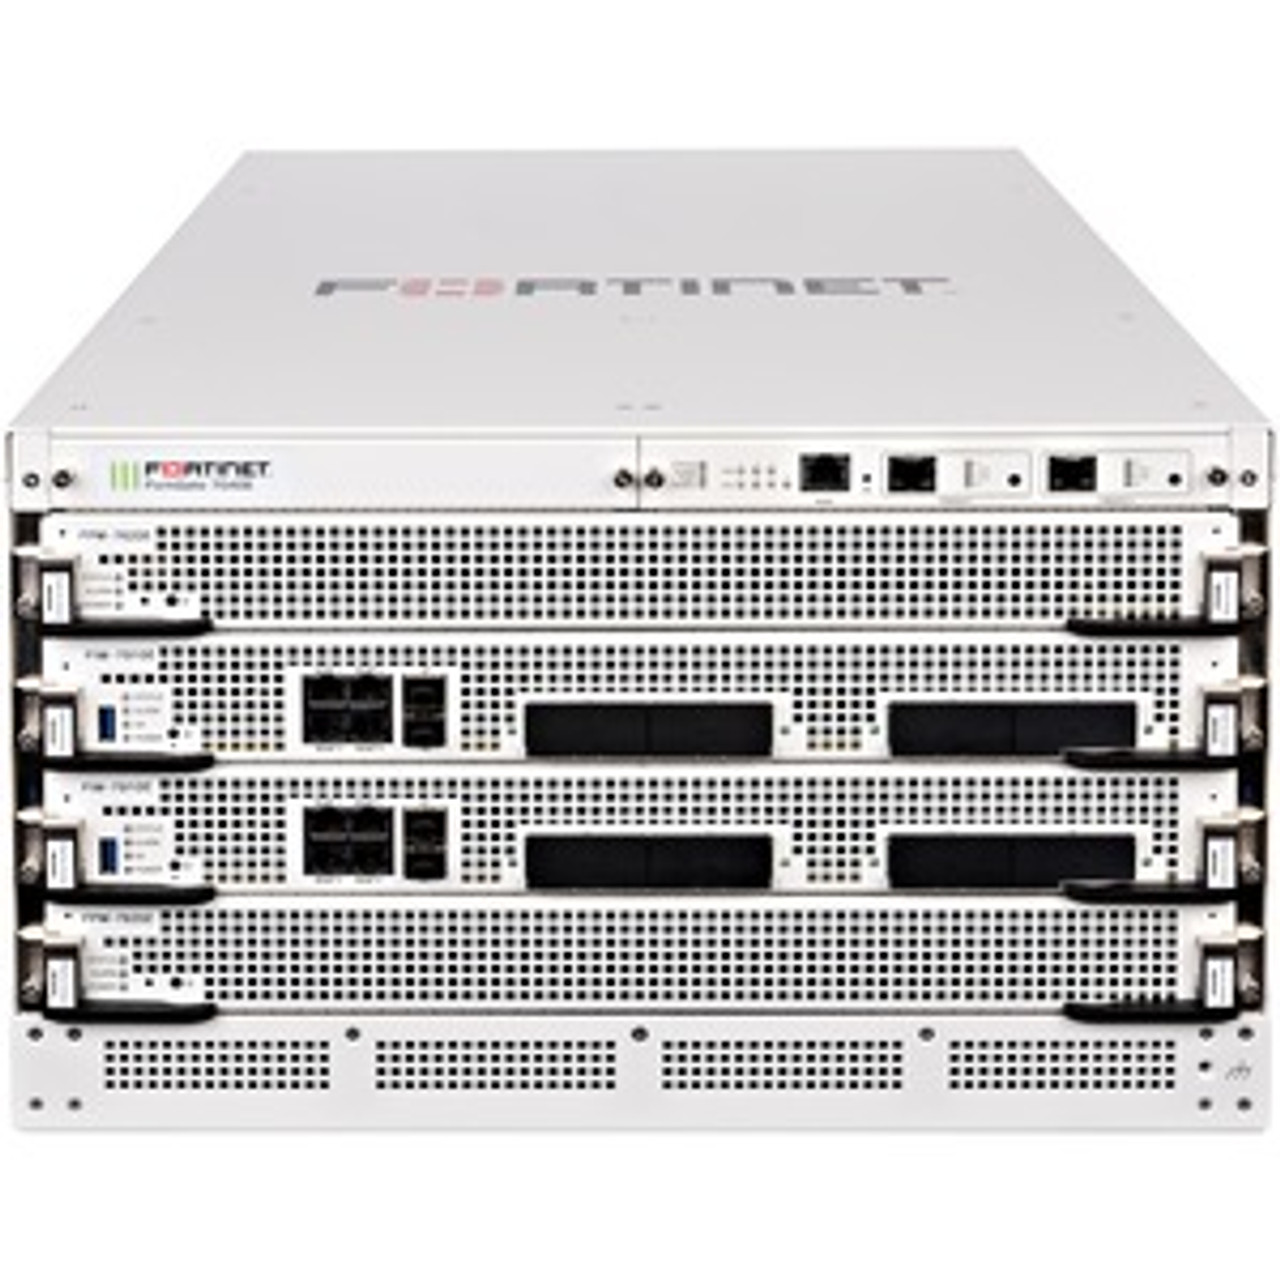 Fortinet FortiGate FG-7040E Network Security/Firewall Appliance - AES (256-bit), SHA-1 - 48000 VPN - 4 Total Expansion Slots - 1 Year 24x7 FortiCare and Unified Threat Protection (UTP) - 6U - Rack-mountable 24X7